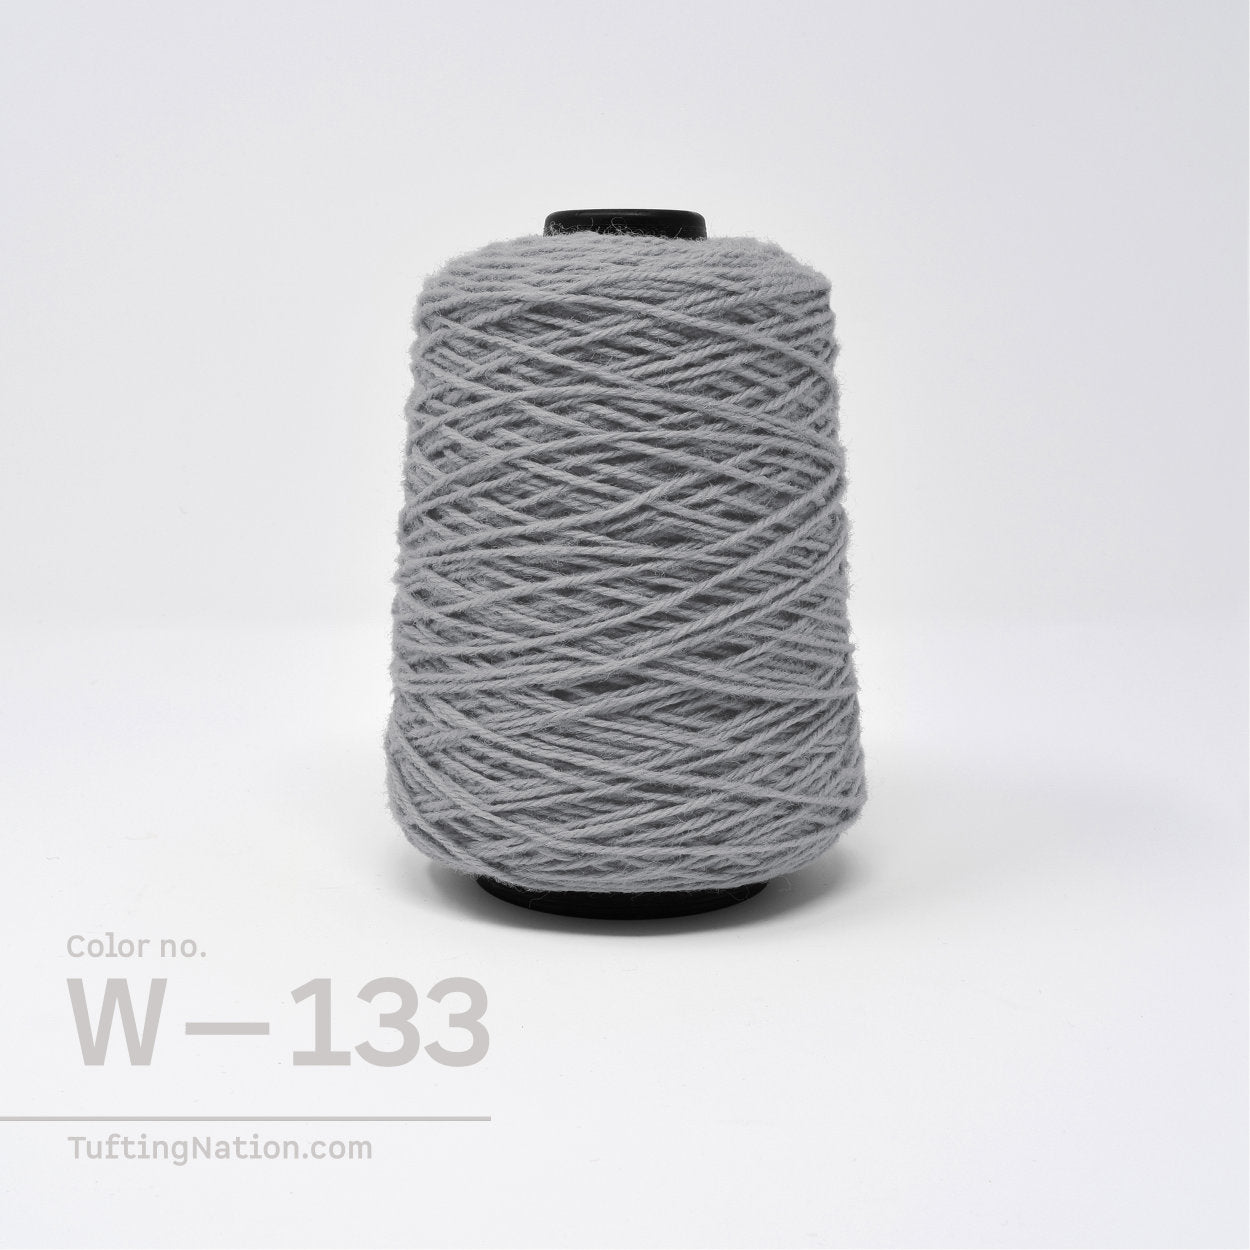 Grey Tufting Yarn On Spool for Rug Tufting, Weaving and Punch Needle | TuftingNation